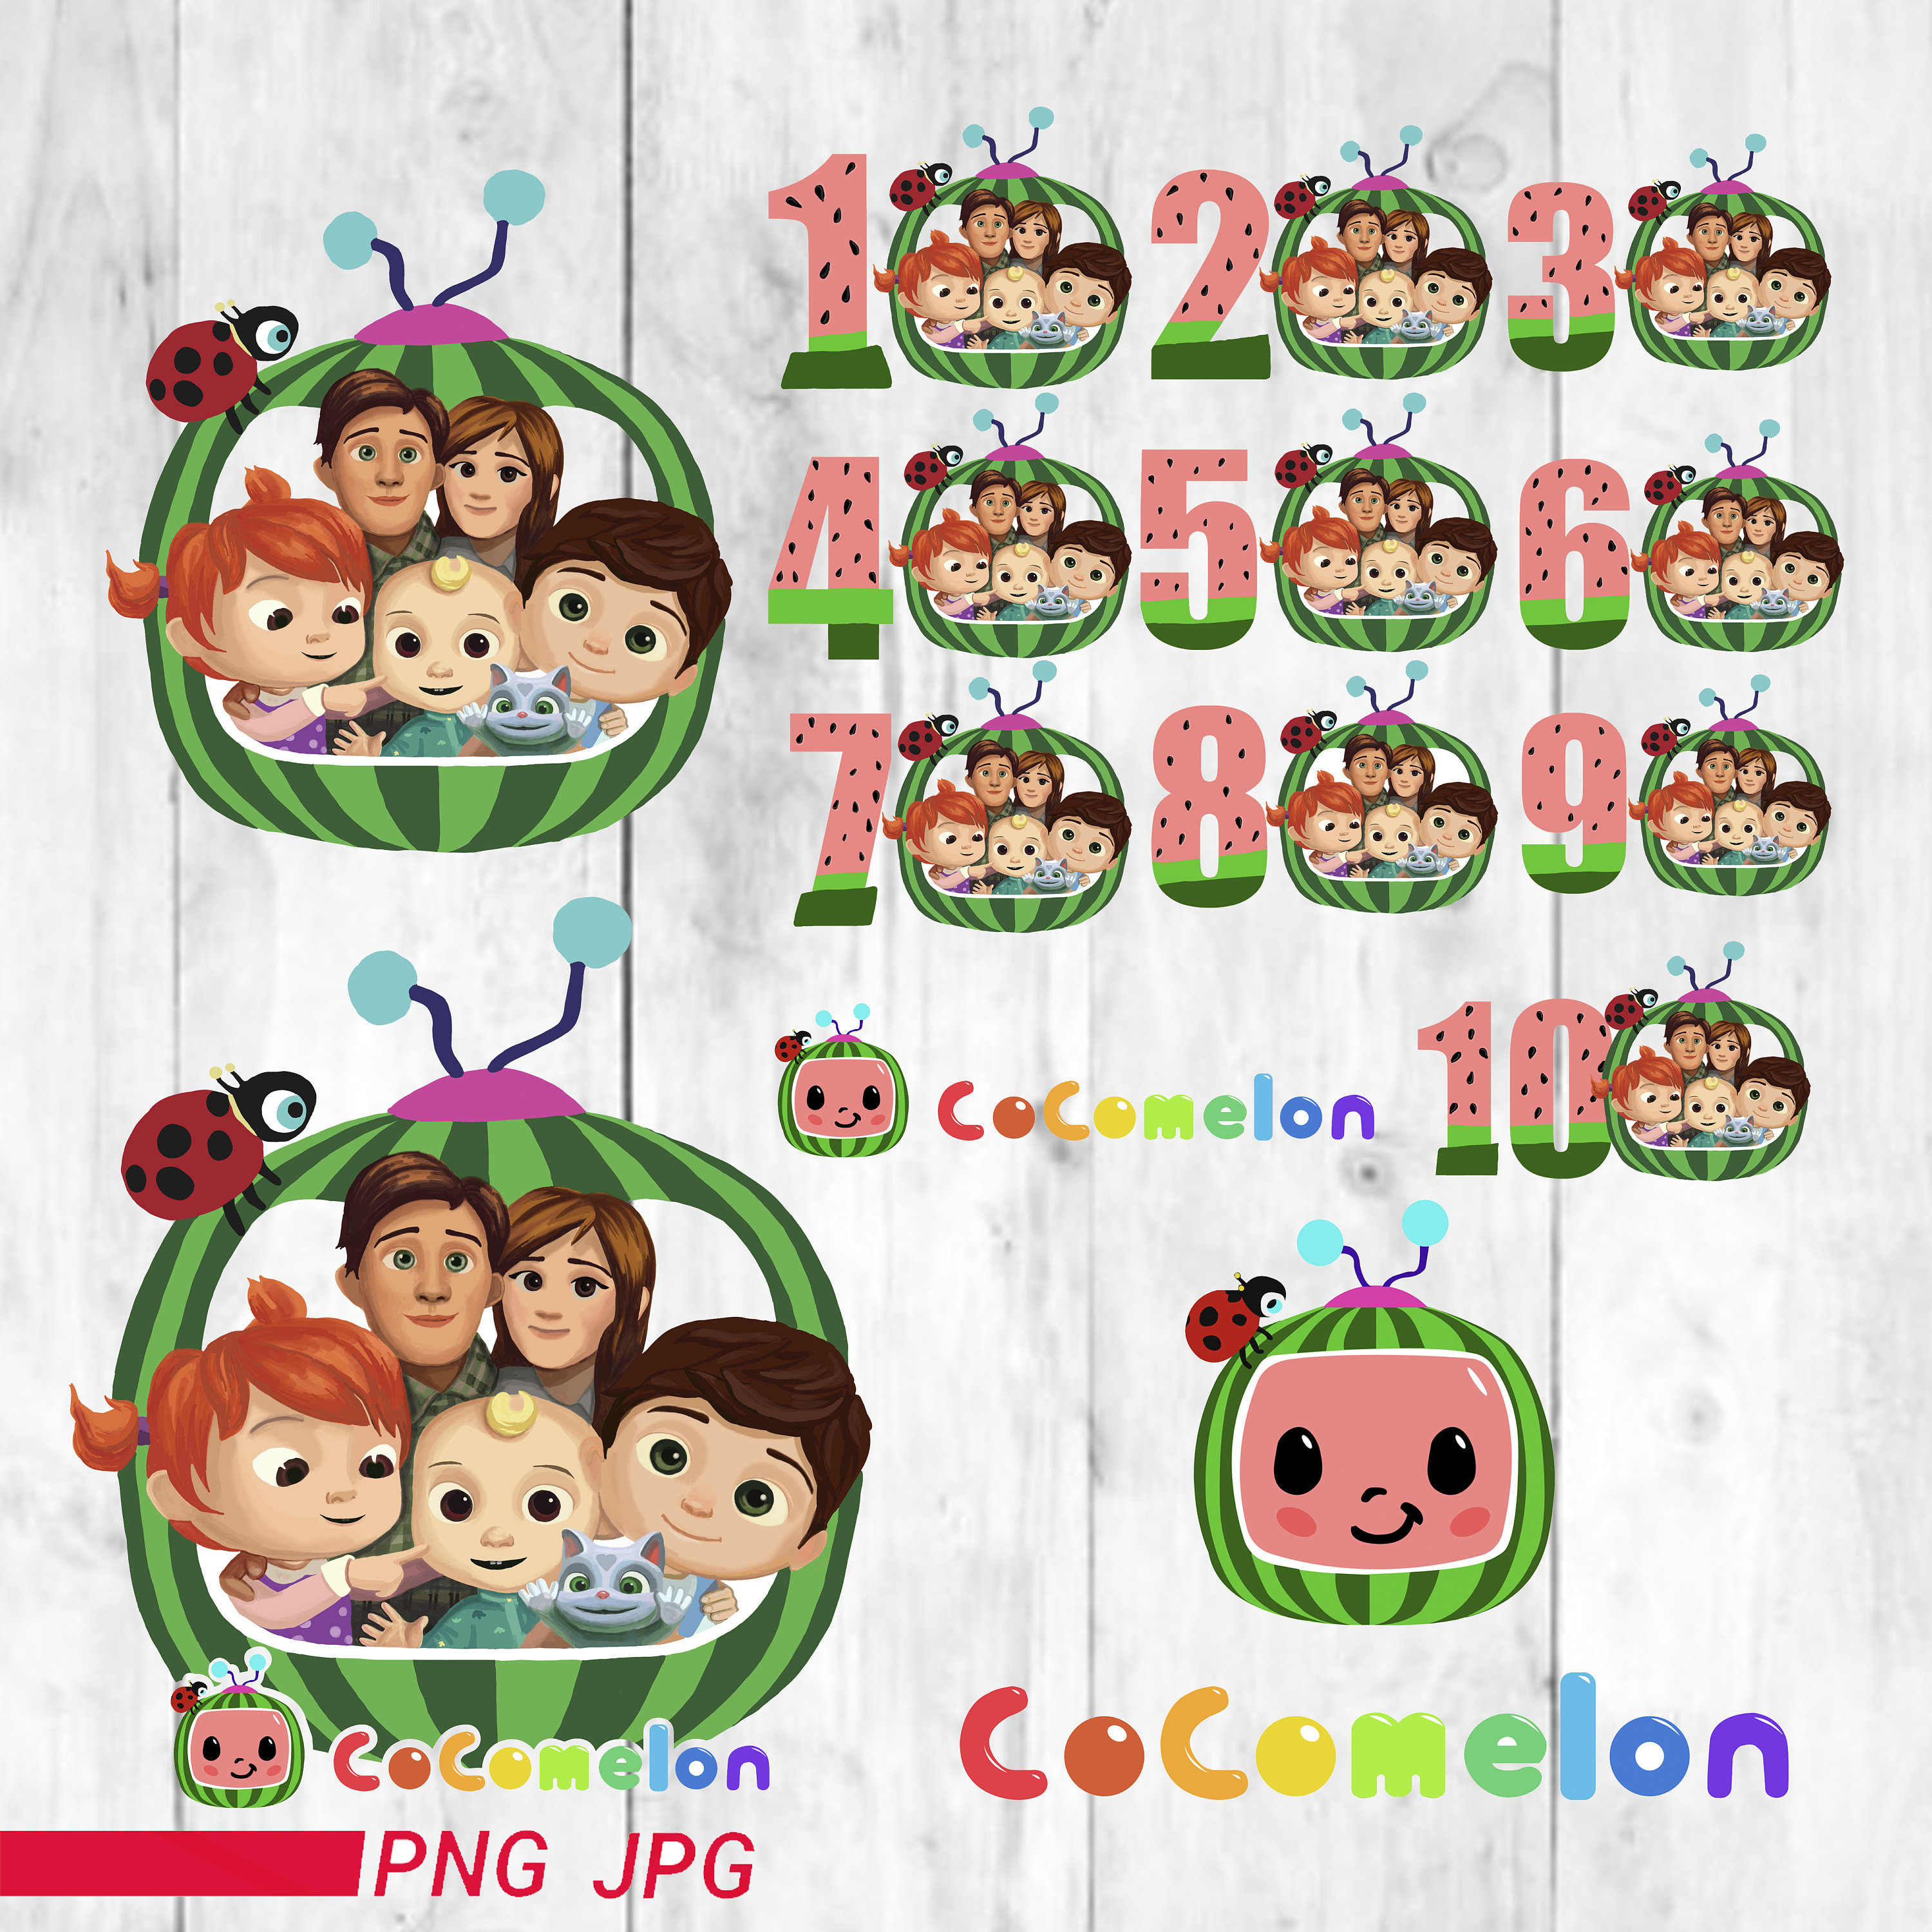 Cocomelon Family Logo PNG Cocomelon Kids PNG файл Cocomelon | Etsy